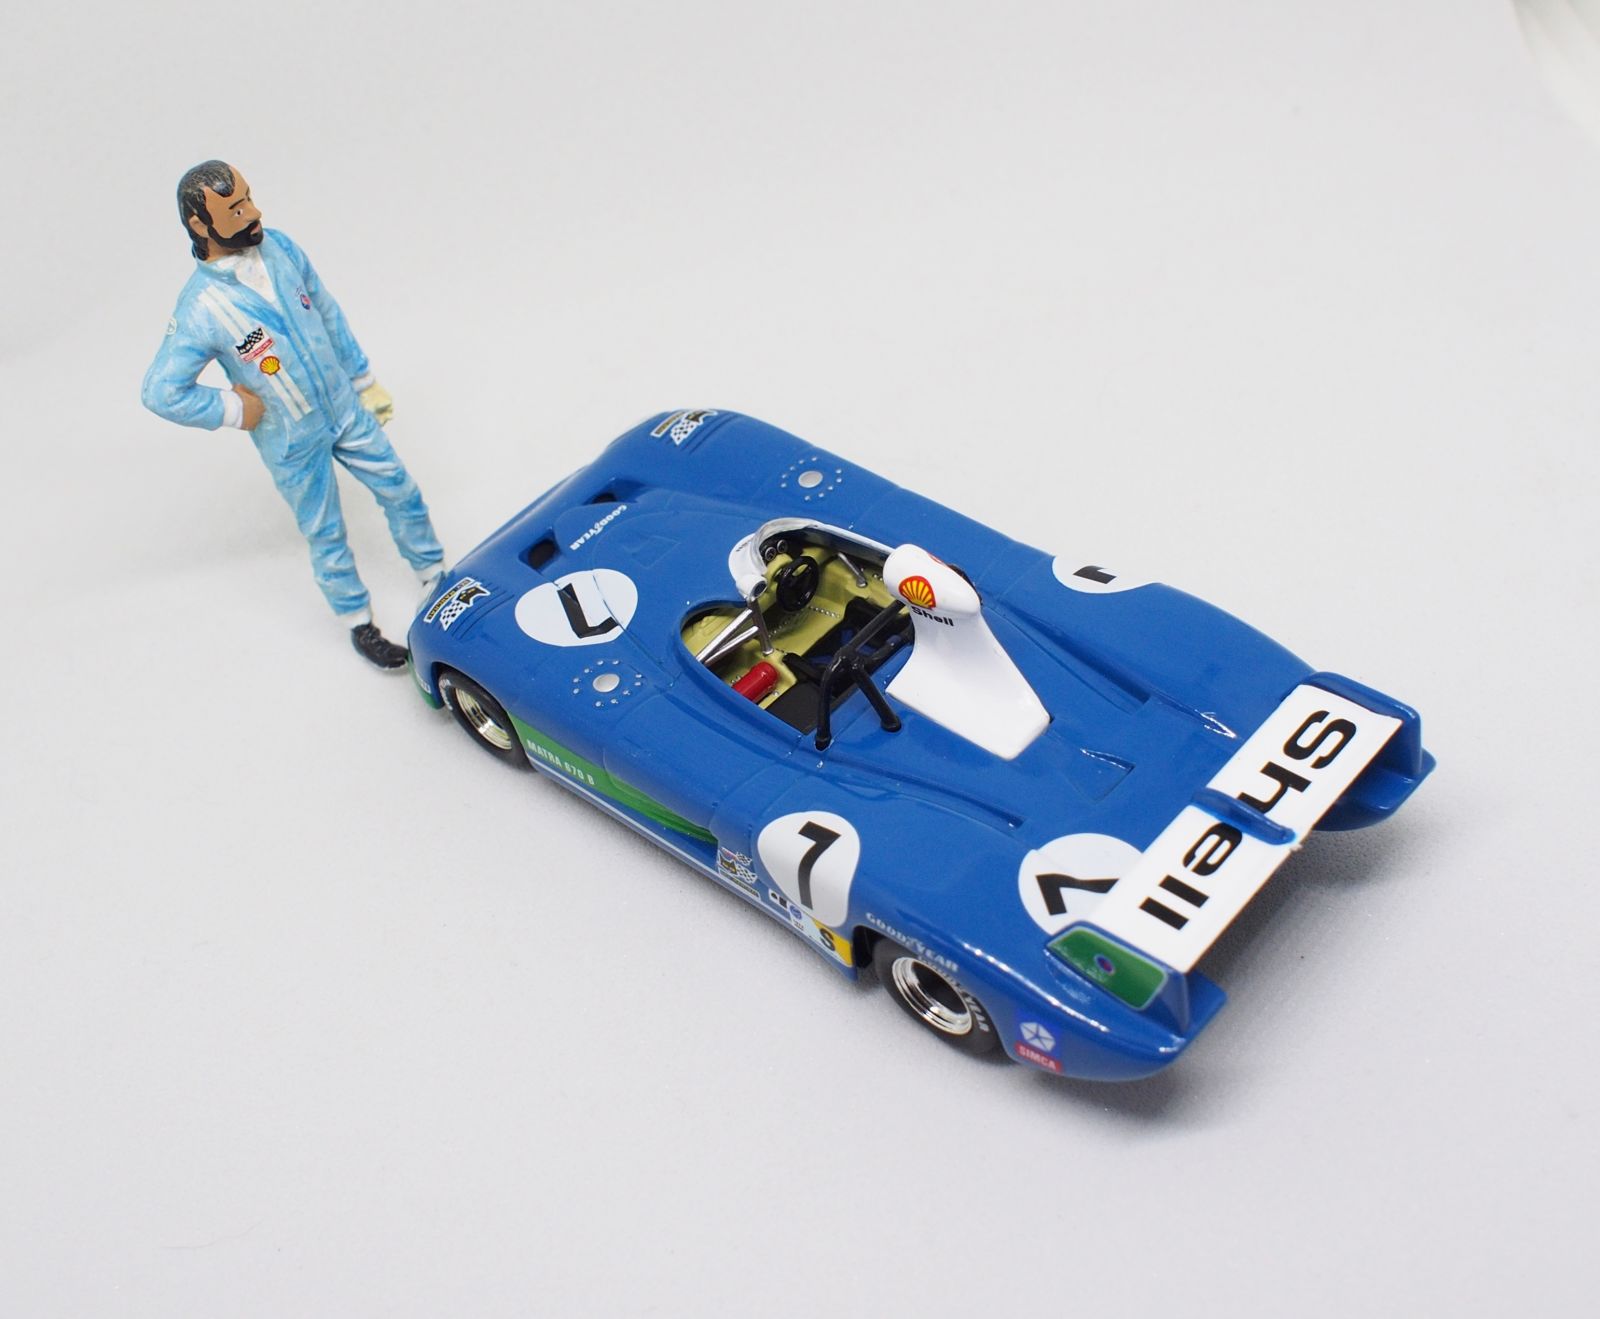 Illustration for article titled LaLeMans - Mr. Le Mans: Pescarolo And The 1974 Matra-Simca MS670B